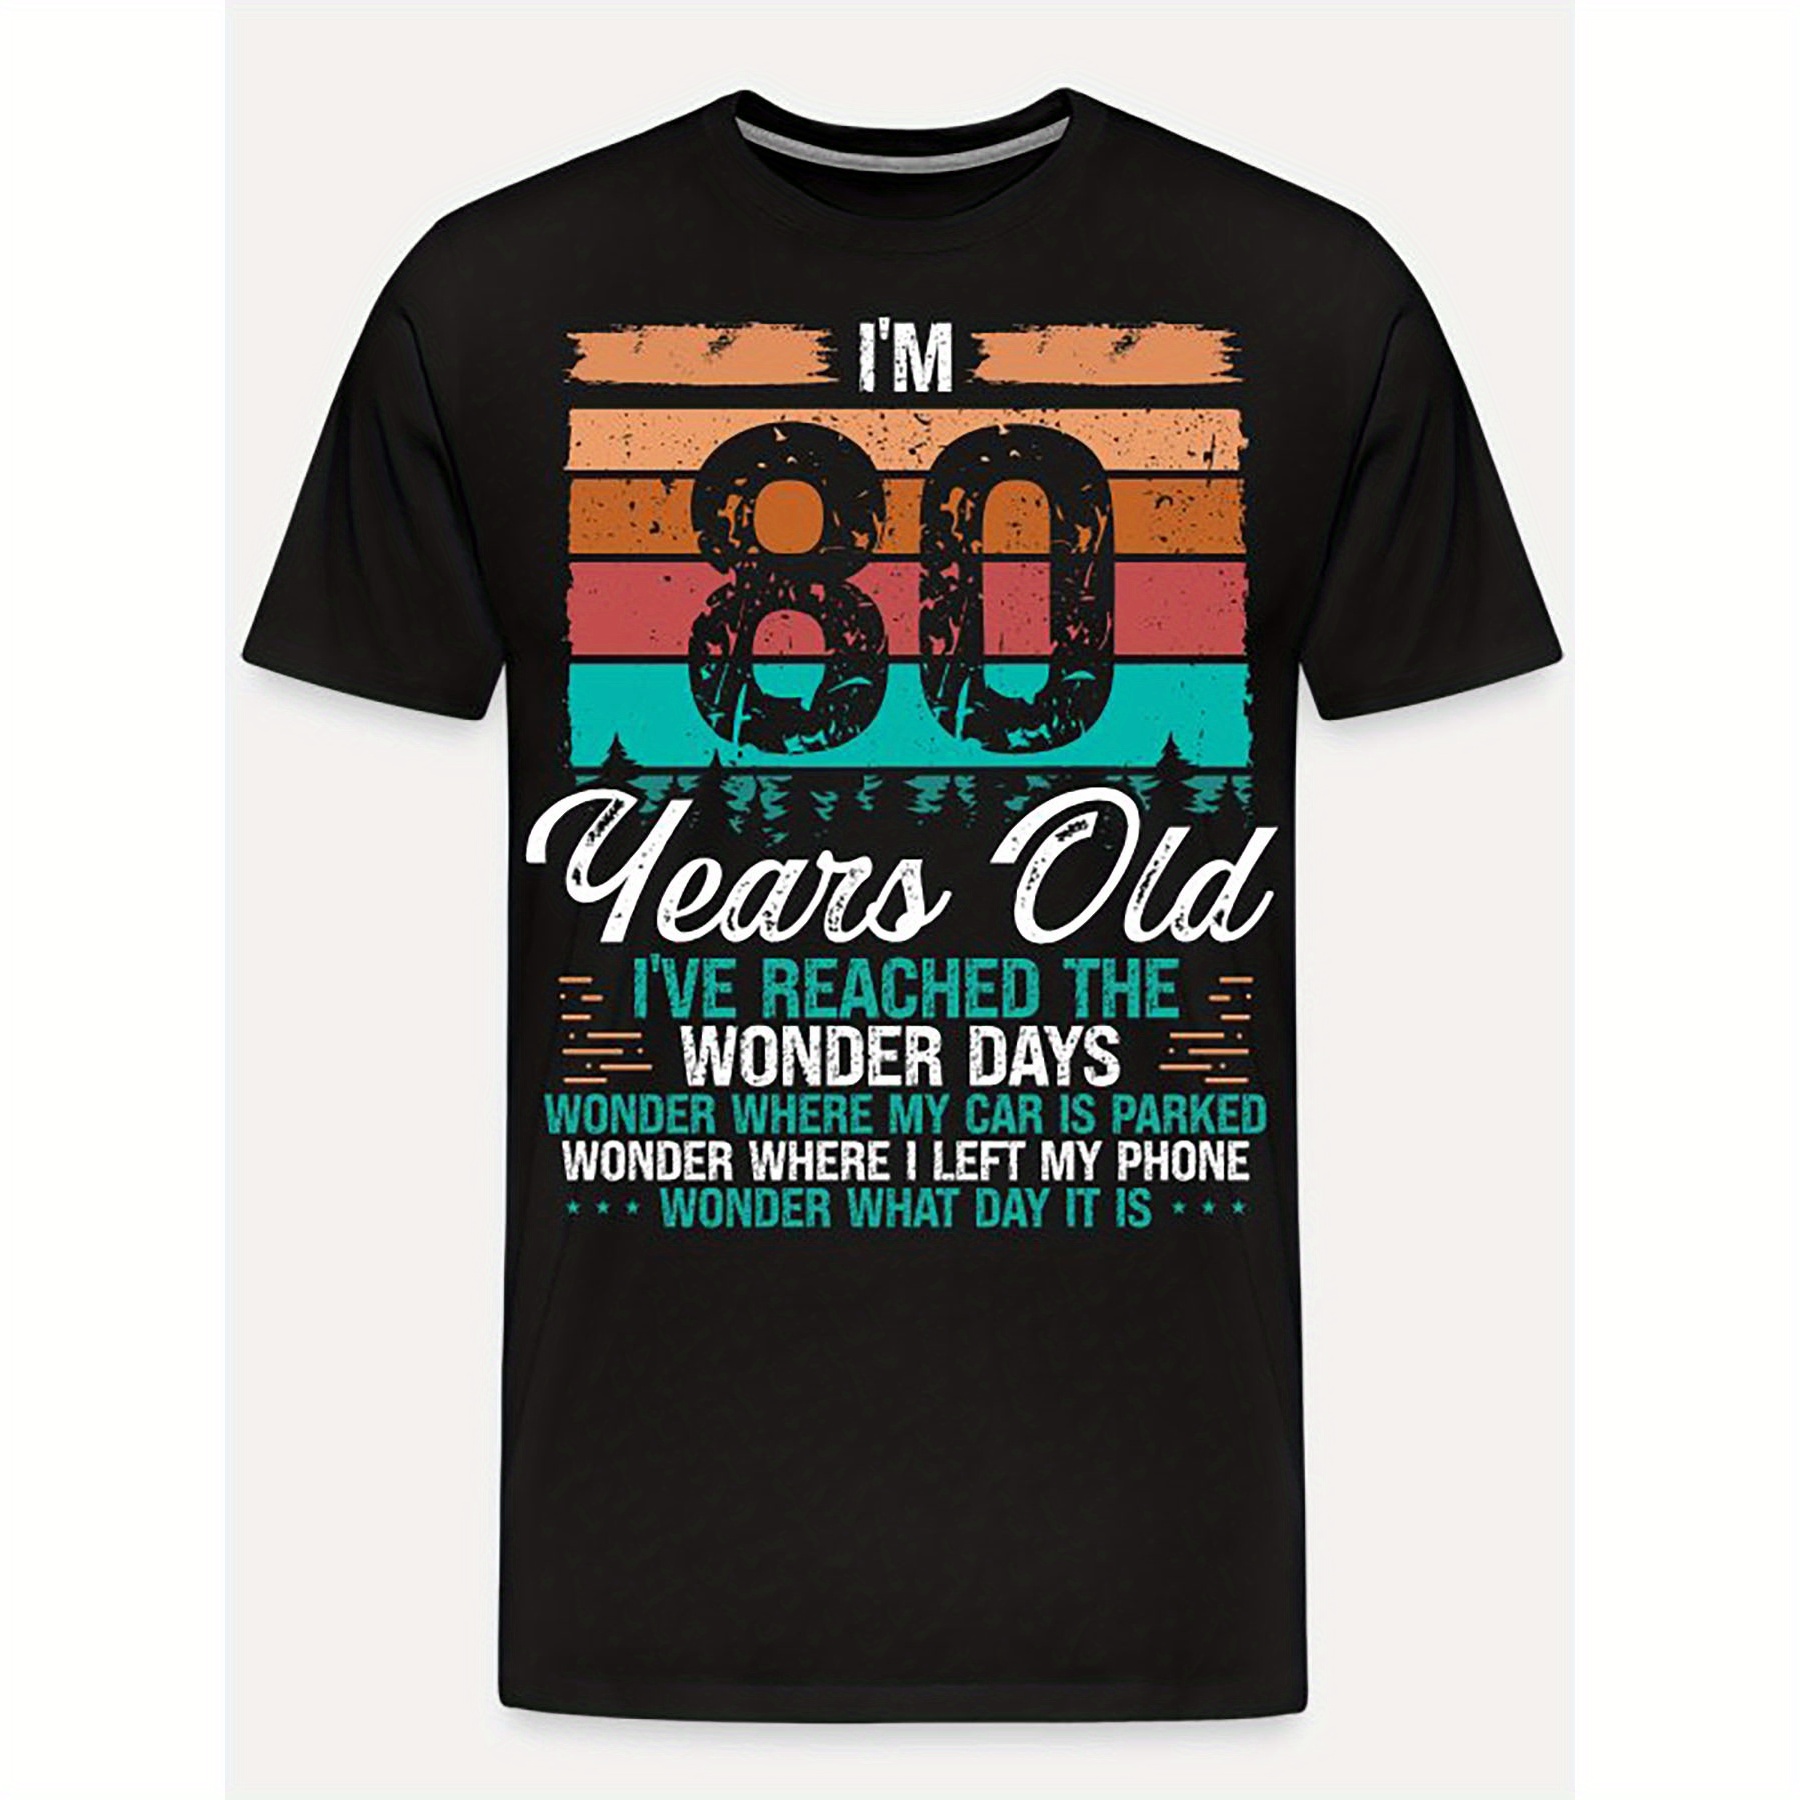 

80th Birthday T-shirt - Unique Retro Design, Humorous Graphic Print, Comfortable Short Sleeve Style, Black - Celebrate 80 Years Of Life With A Memorable Gift, Perfect Birthday Idea For Him